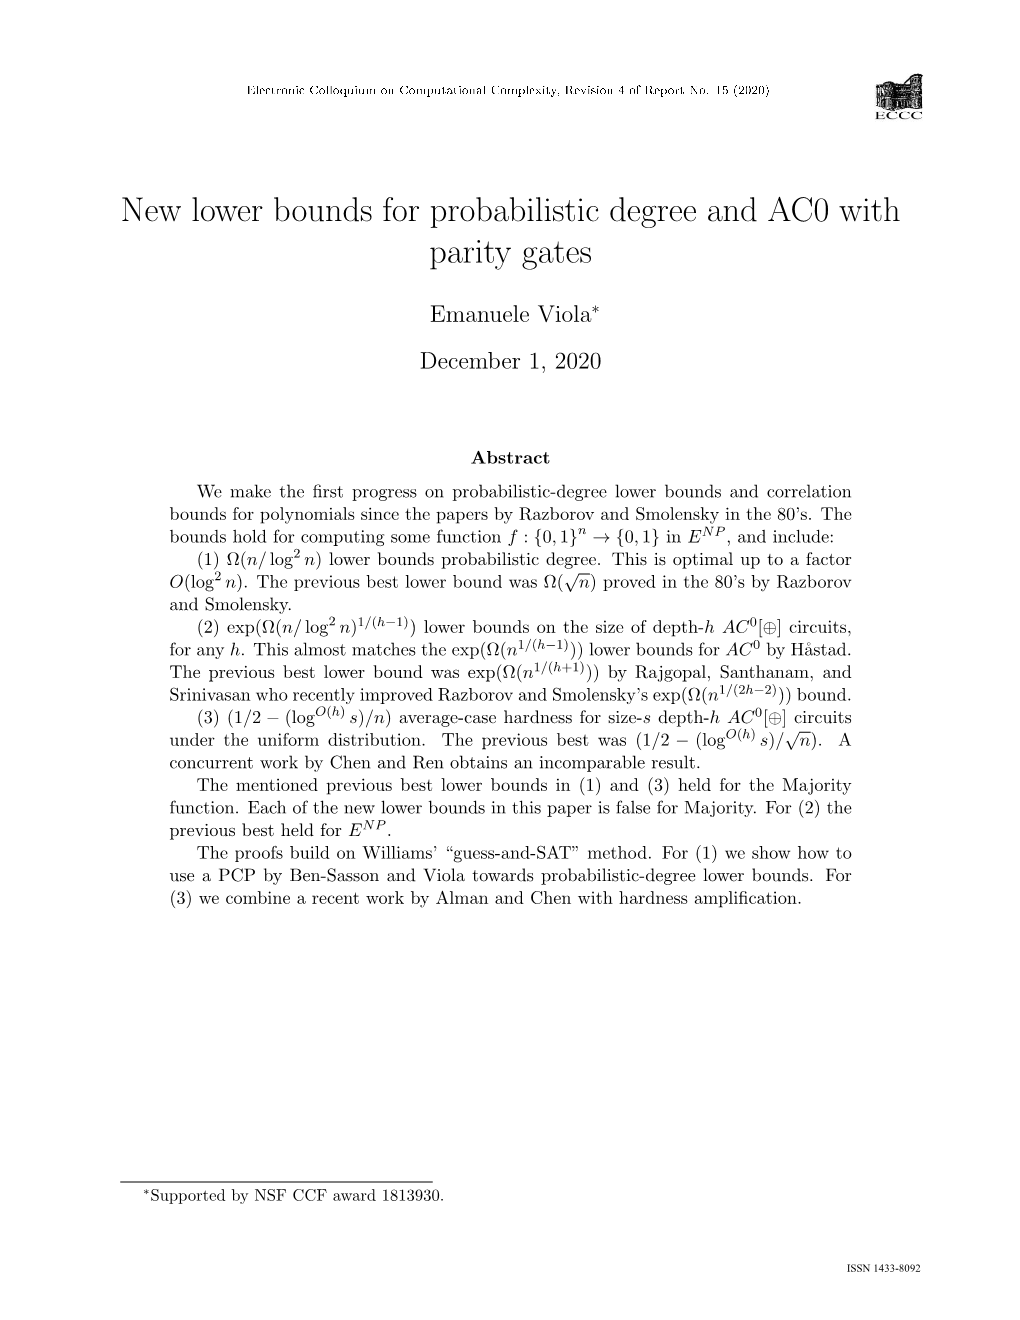 New Lower Bounds for Probabilistic Degree and AC0 with Parity Gates